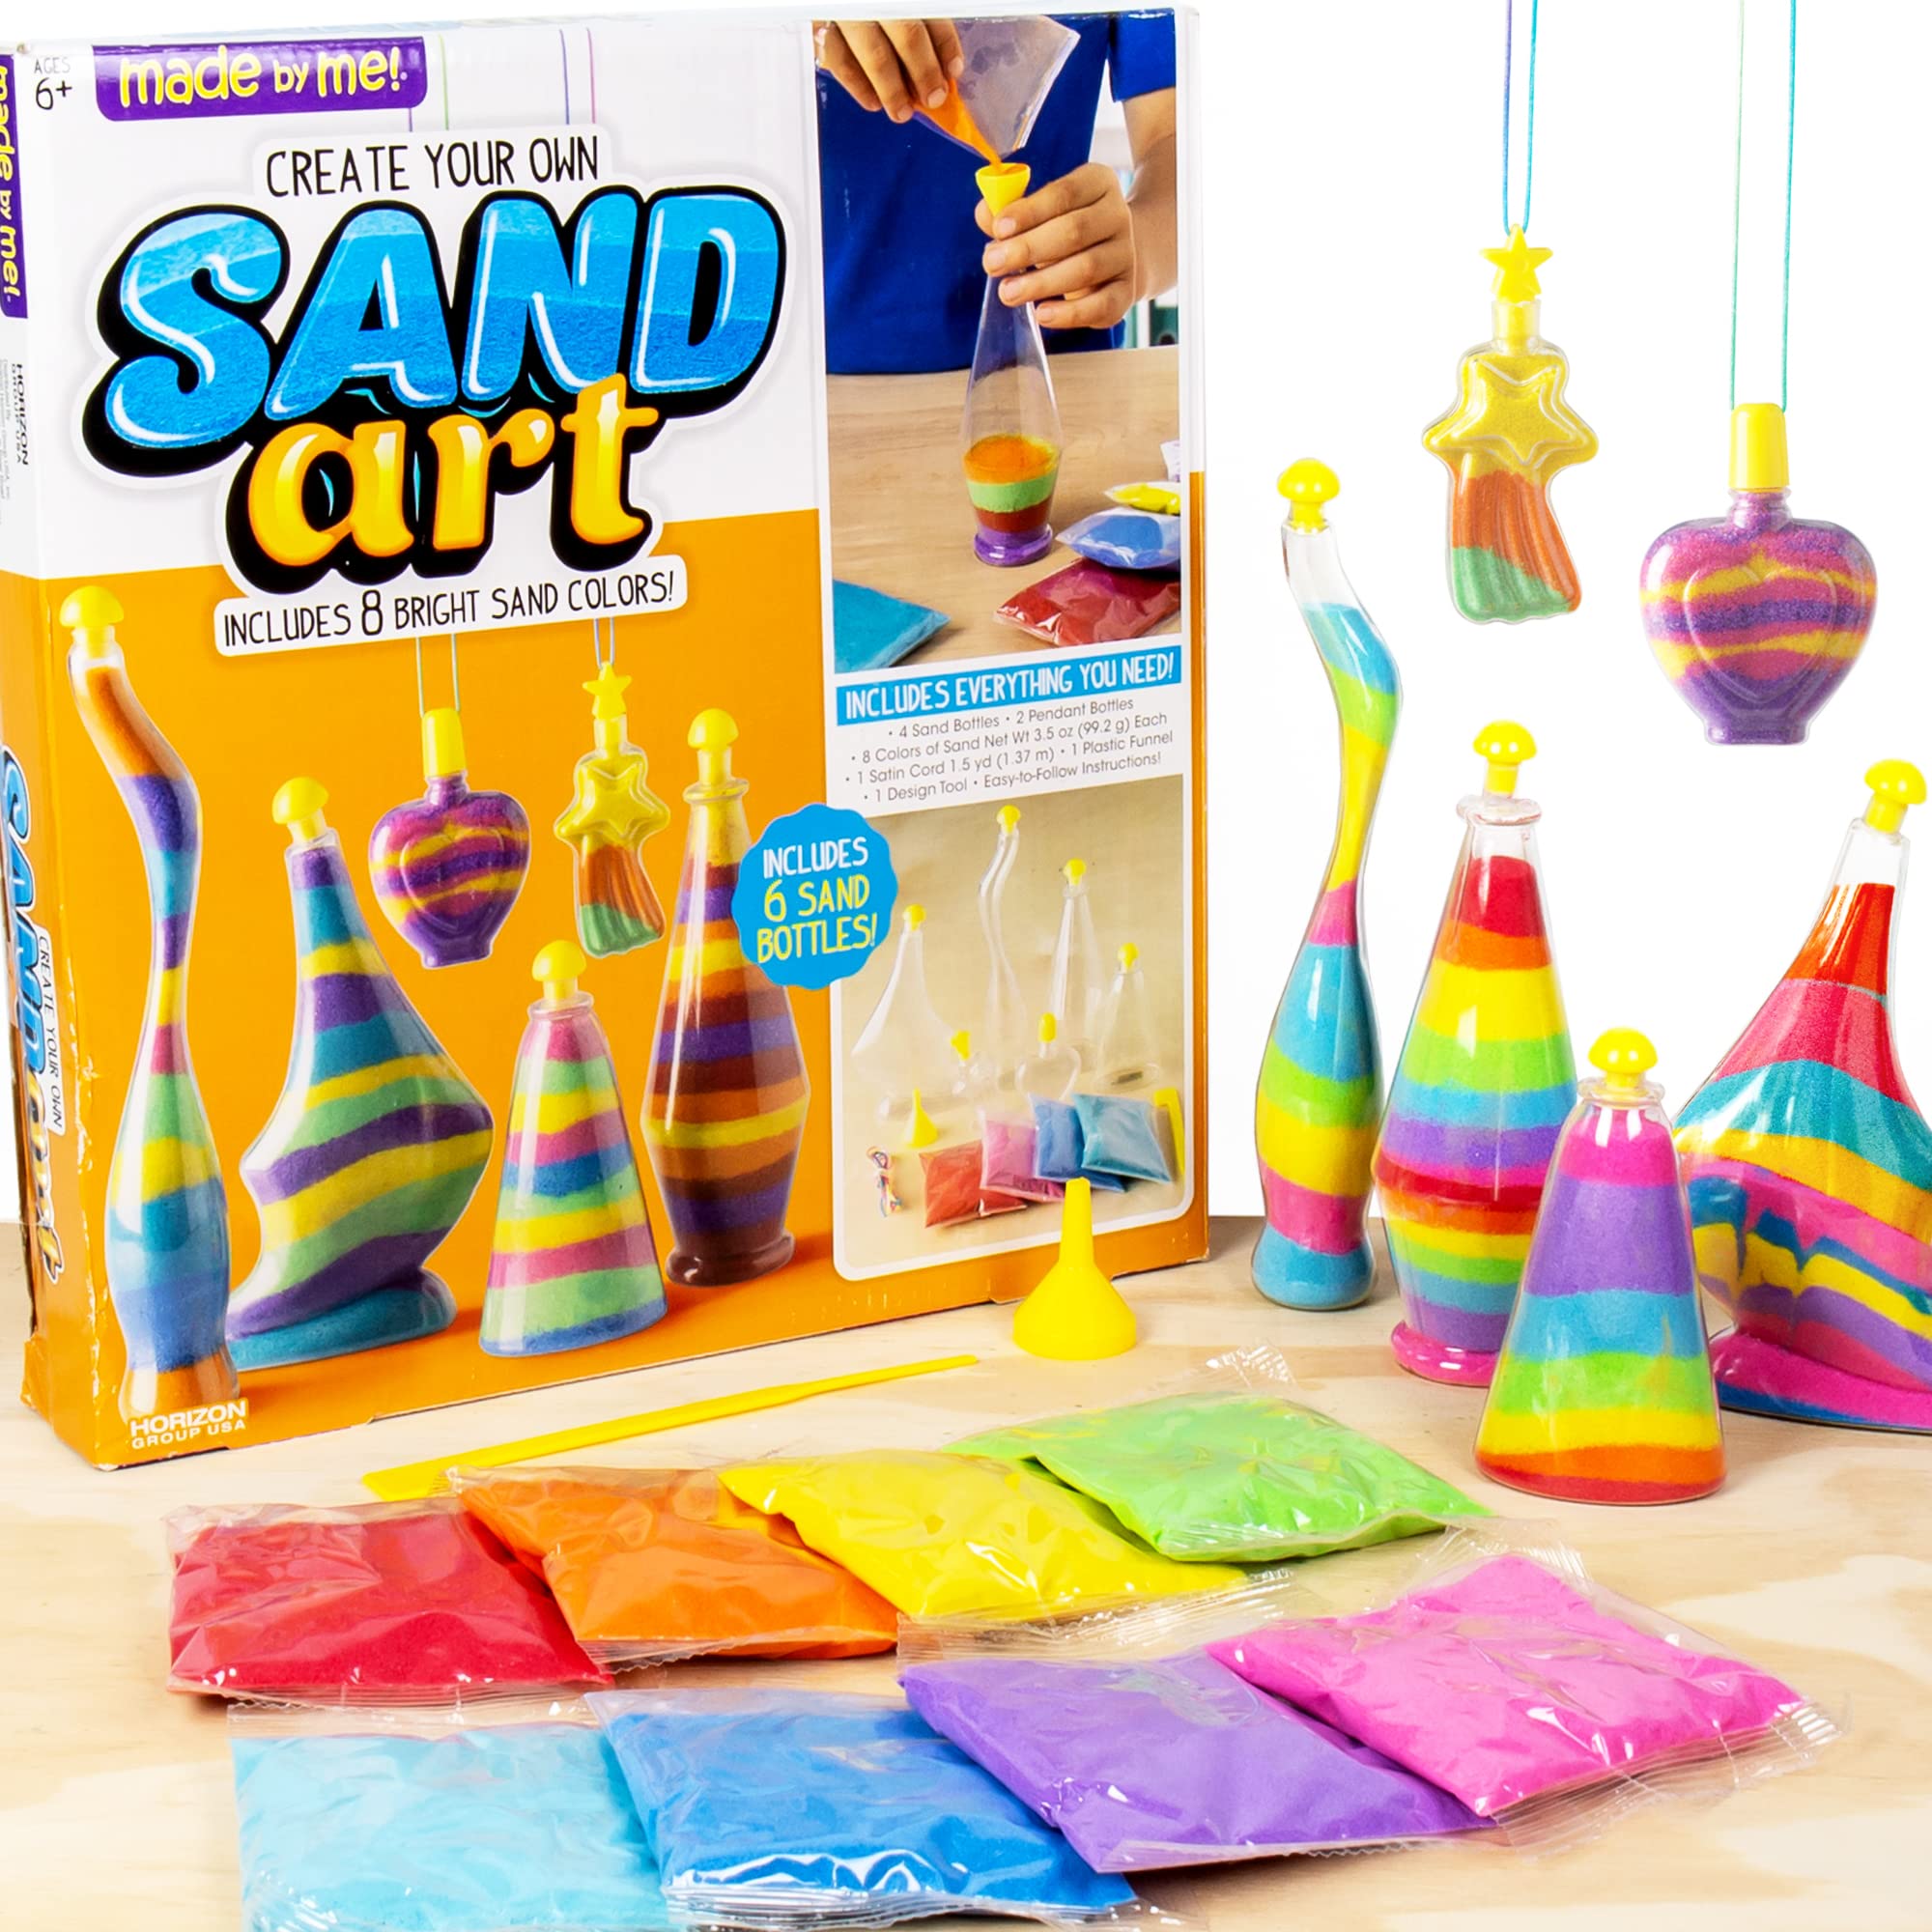 Book Cover Made By Me Create Your Own Sand Art by Horizon Group Usa, DIY Kit Includes 4 Sand Bottles & 2 Pendent Bottles with 8 Bright Colors, Designing Tool & More. Multicolored